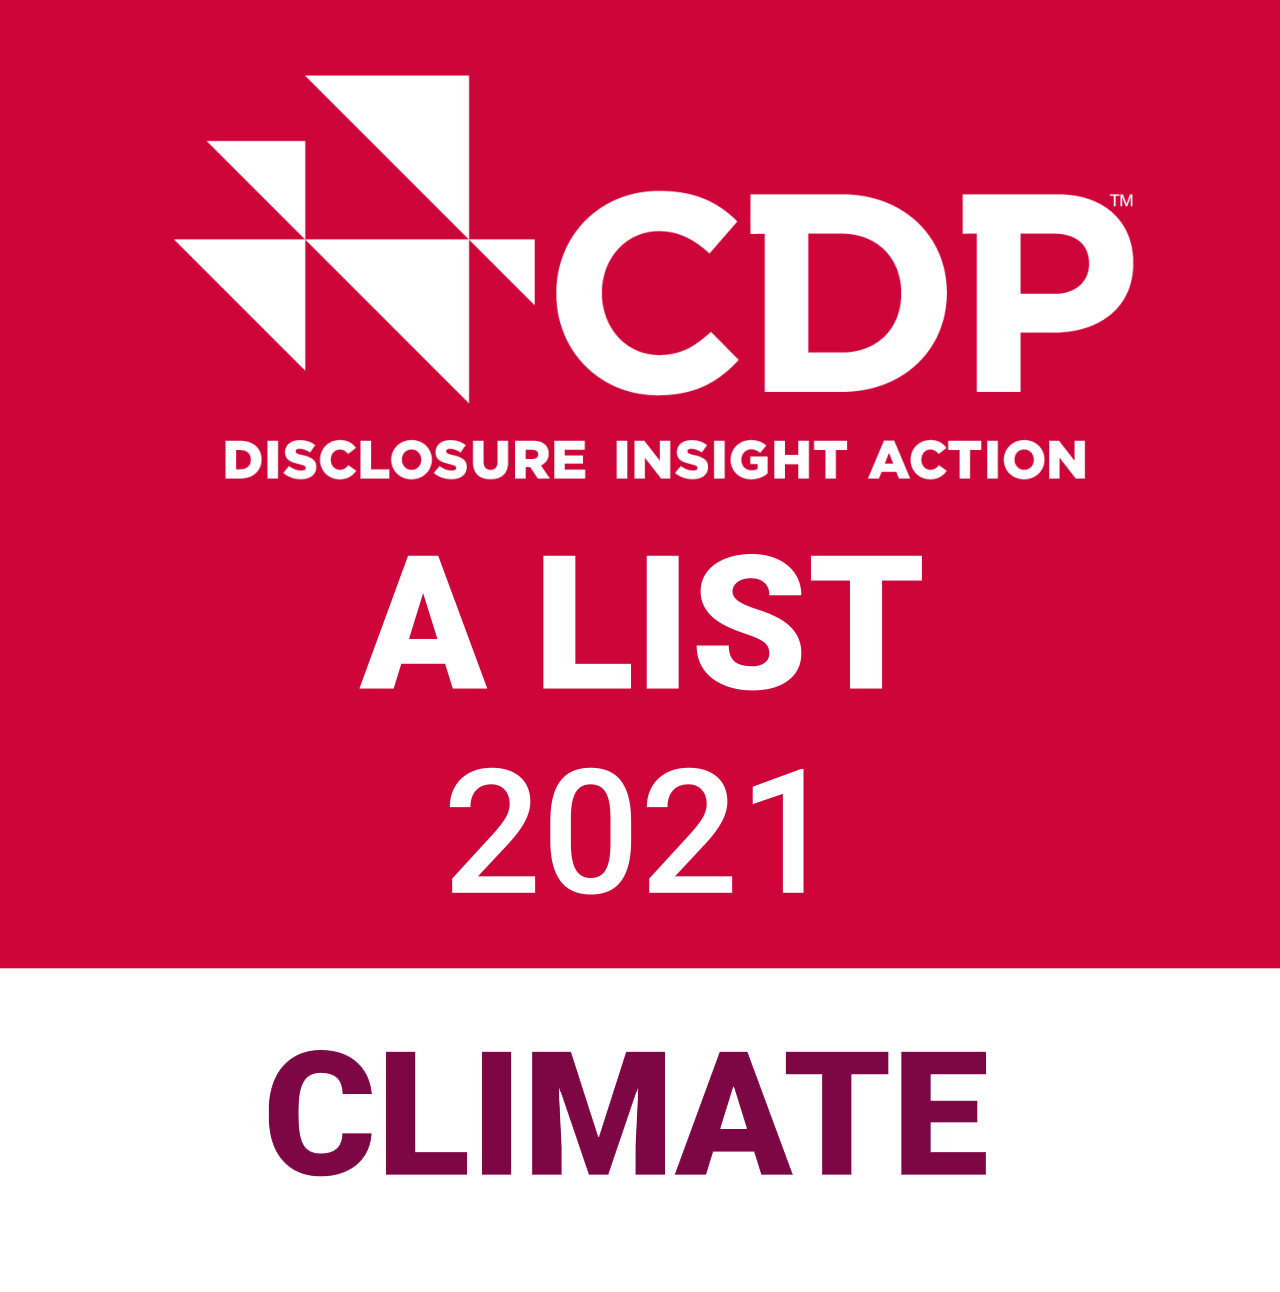 LOGO : CDP DISCLOSURE INSIGHT ACTION ALIST 2021 CLIMATE